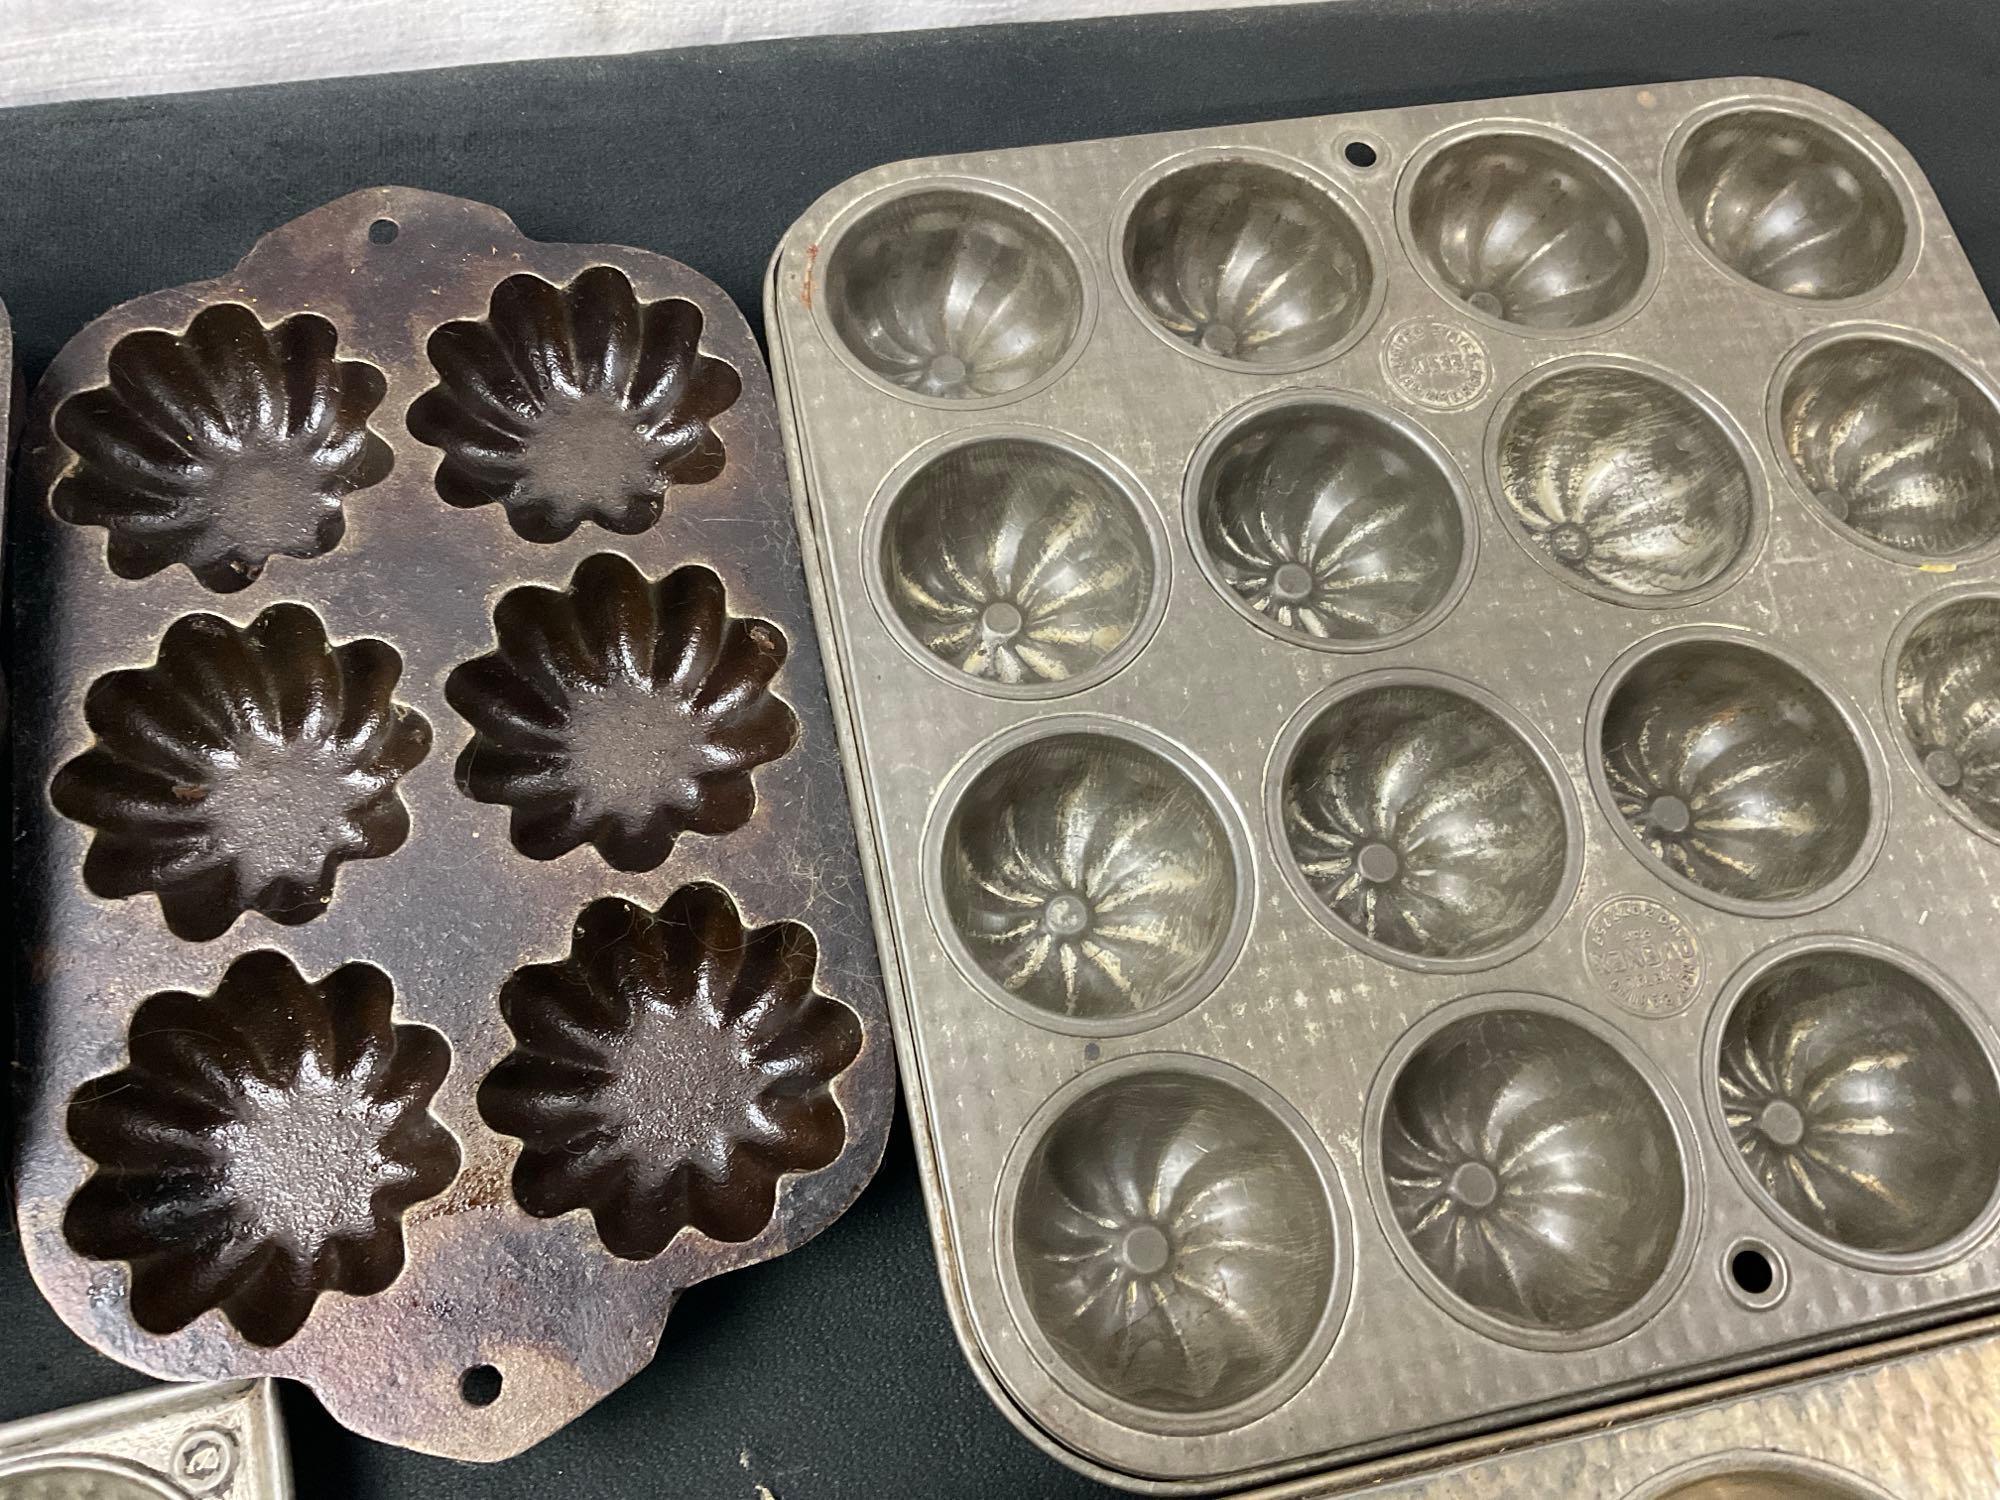 Vintage Cast Iron Wagnerware Grill Pan, Cupcake Molds, Cornbread Pan, and more, 7 pieces